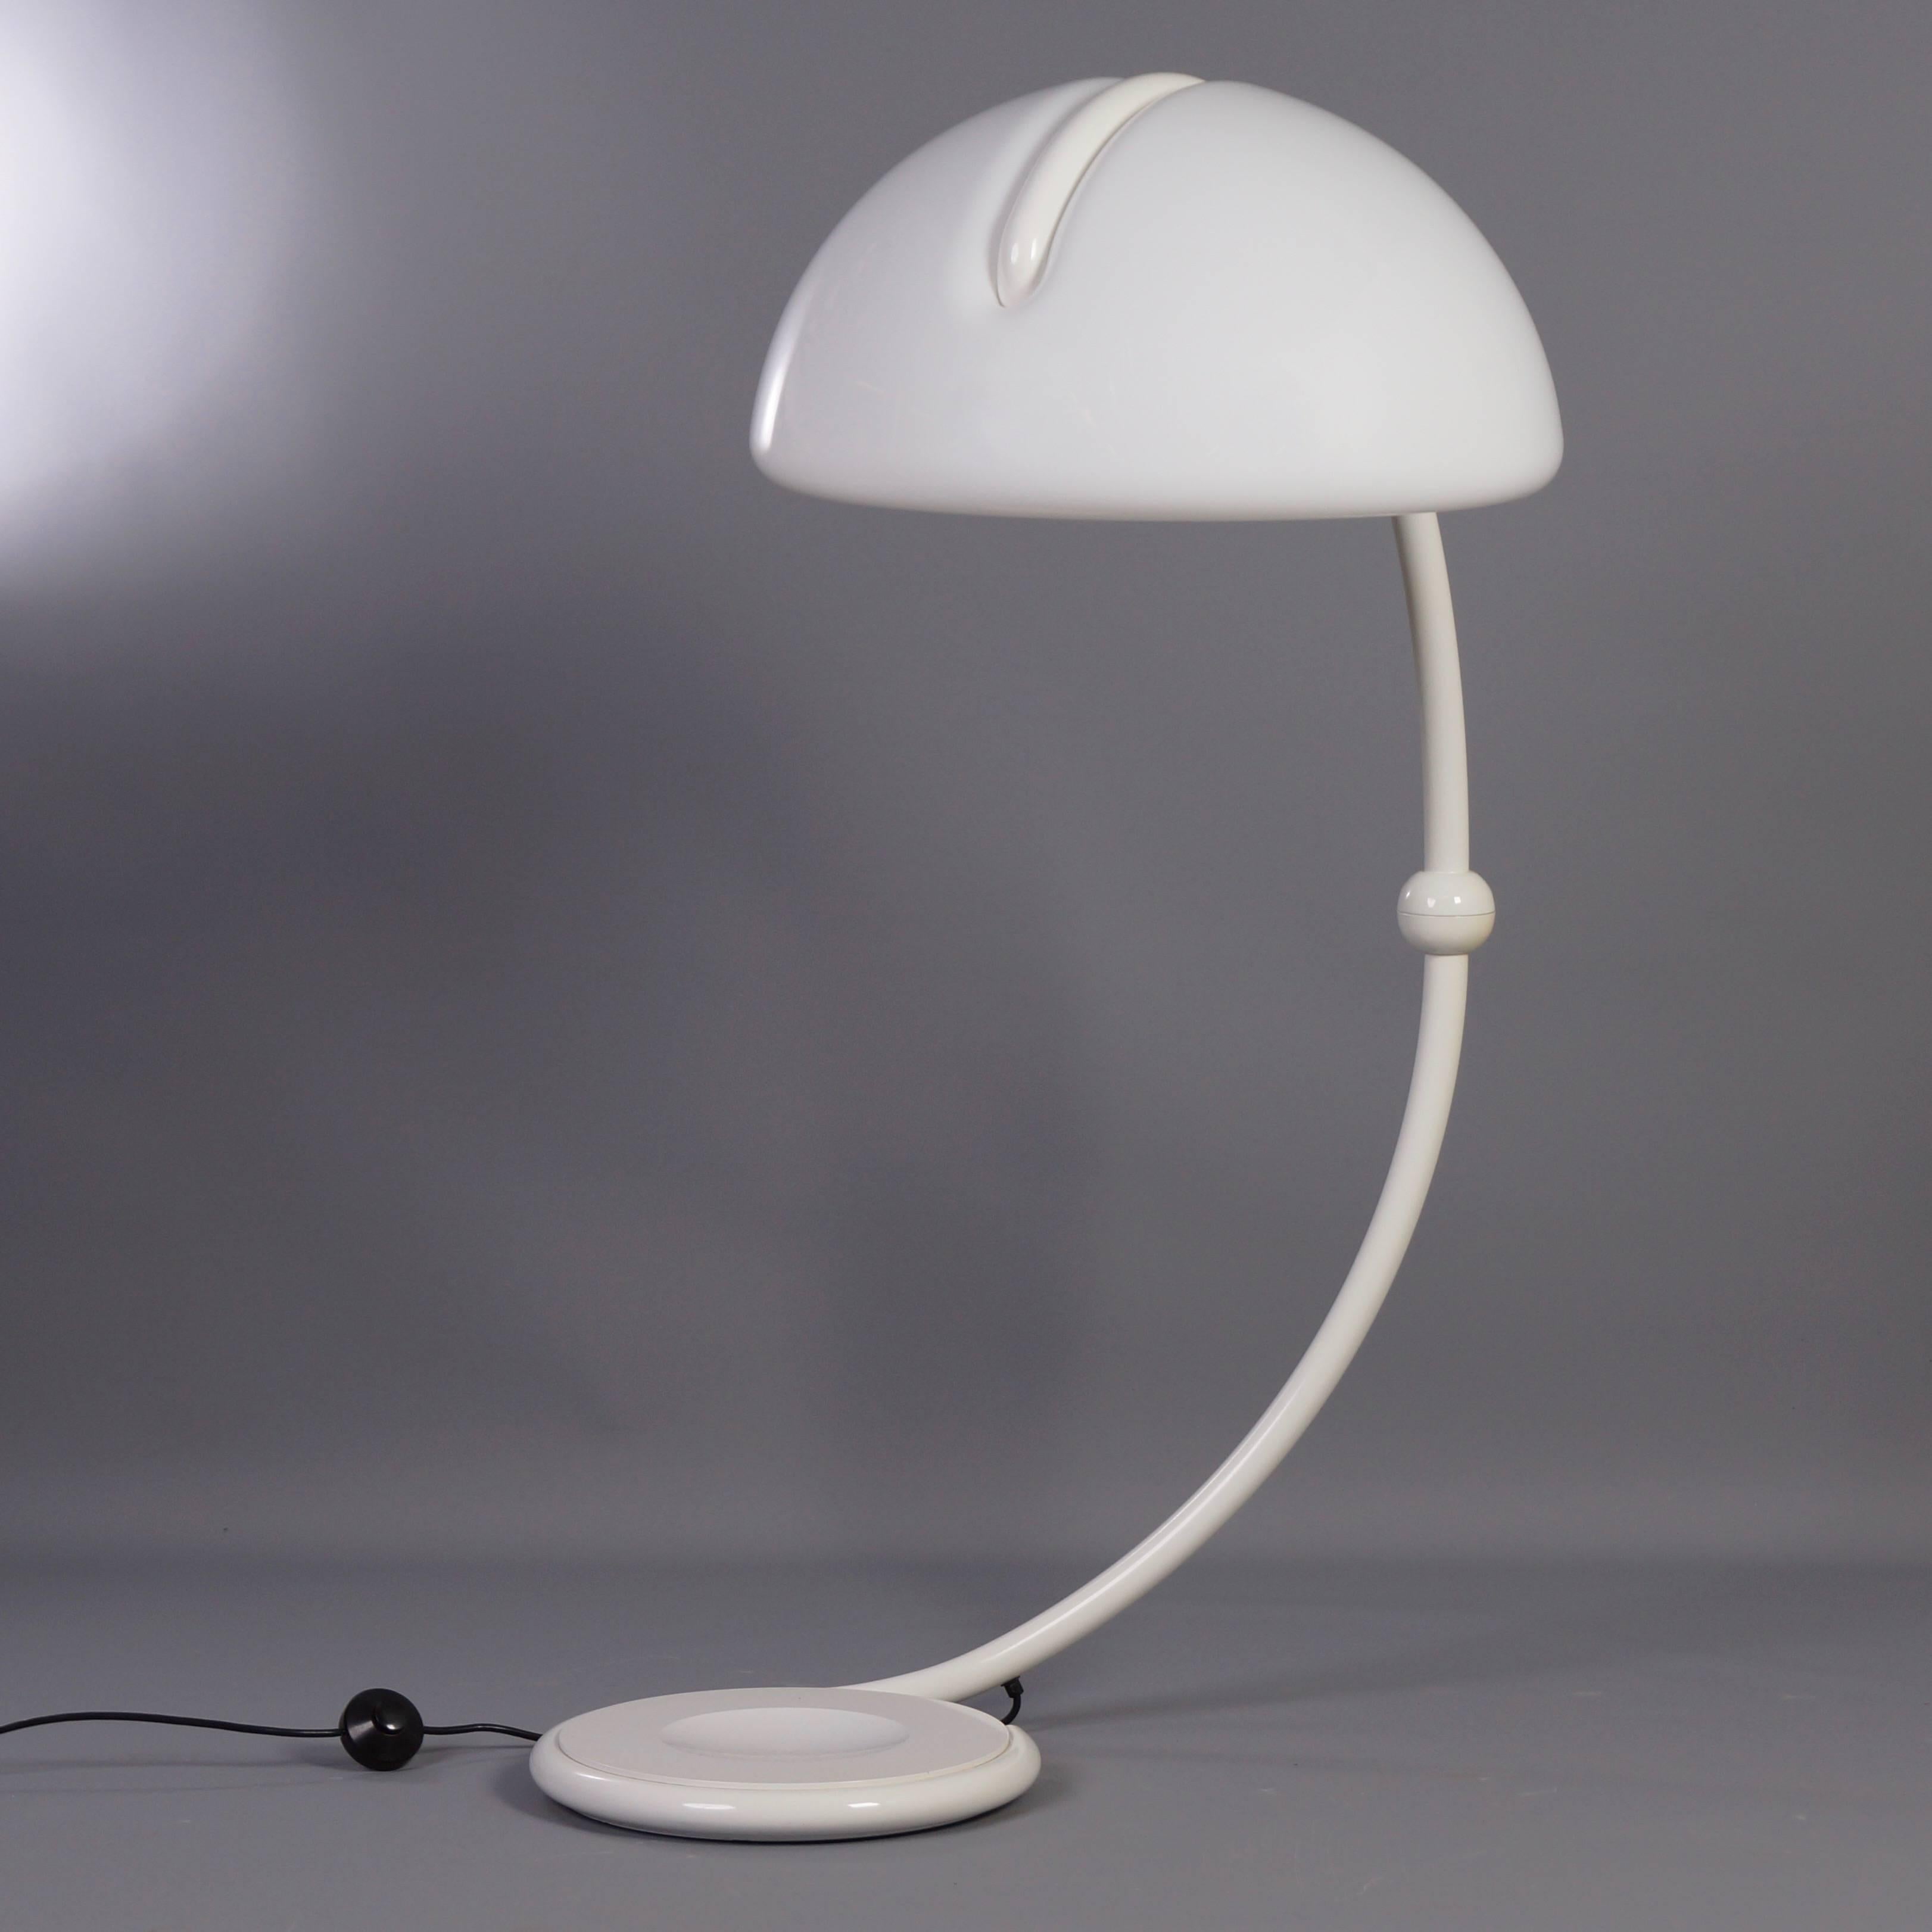 White serpente floor lamp designed by Elio Martinelli for Martinelli Luce in about 1965. This model 2131 with rotatable arm was innovative back then because of its shape. It concerns an original vintage version with the Martinelli logo under the